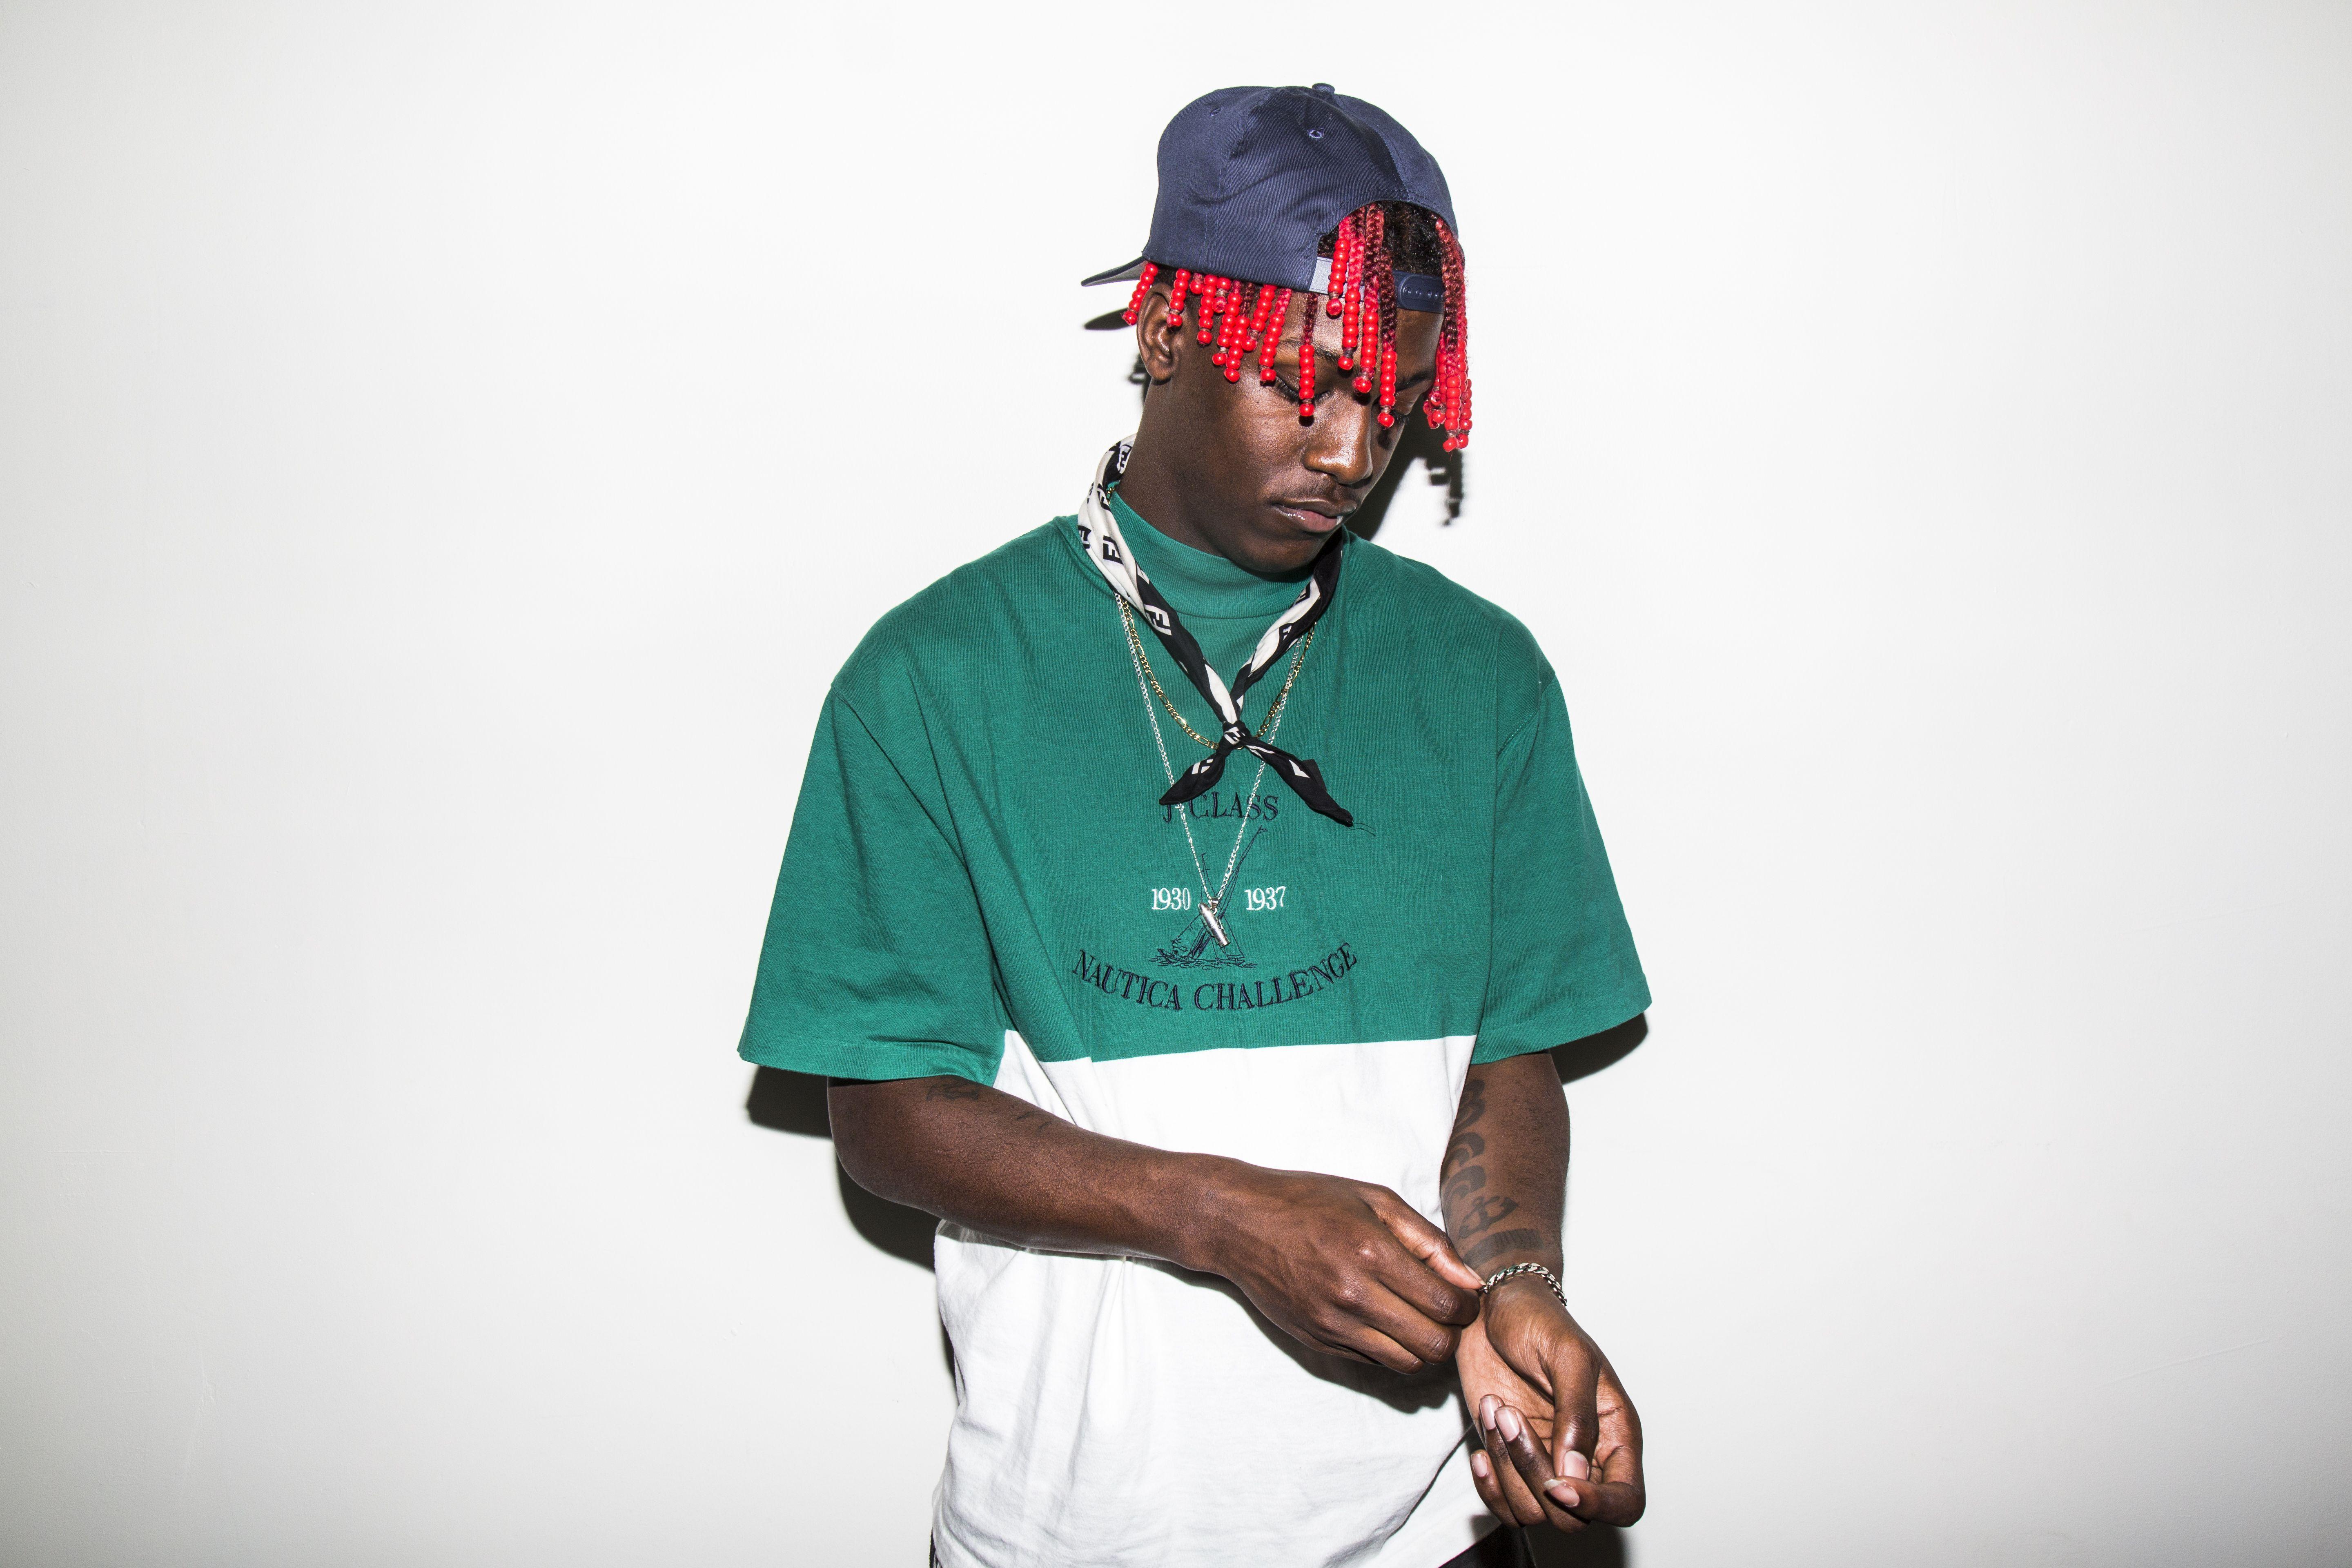 Best image about Lil boat. Retro clothing, On